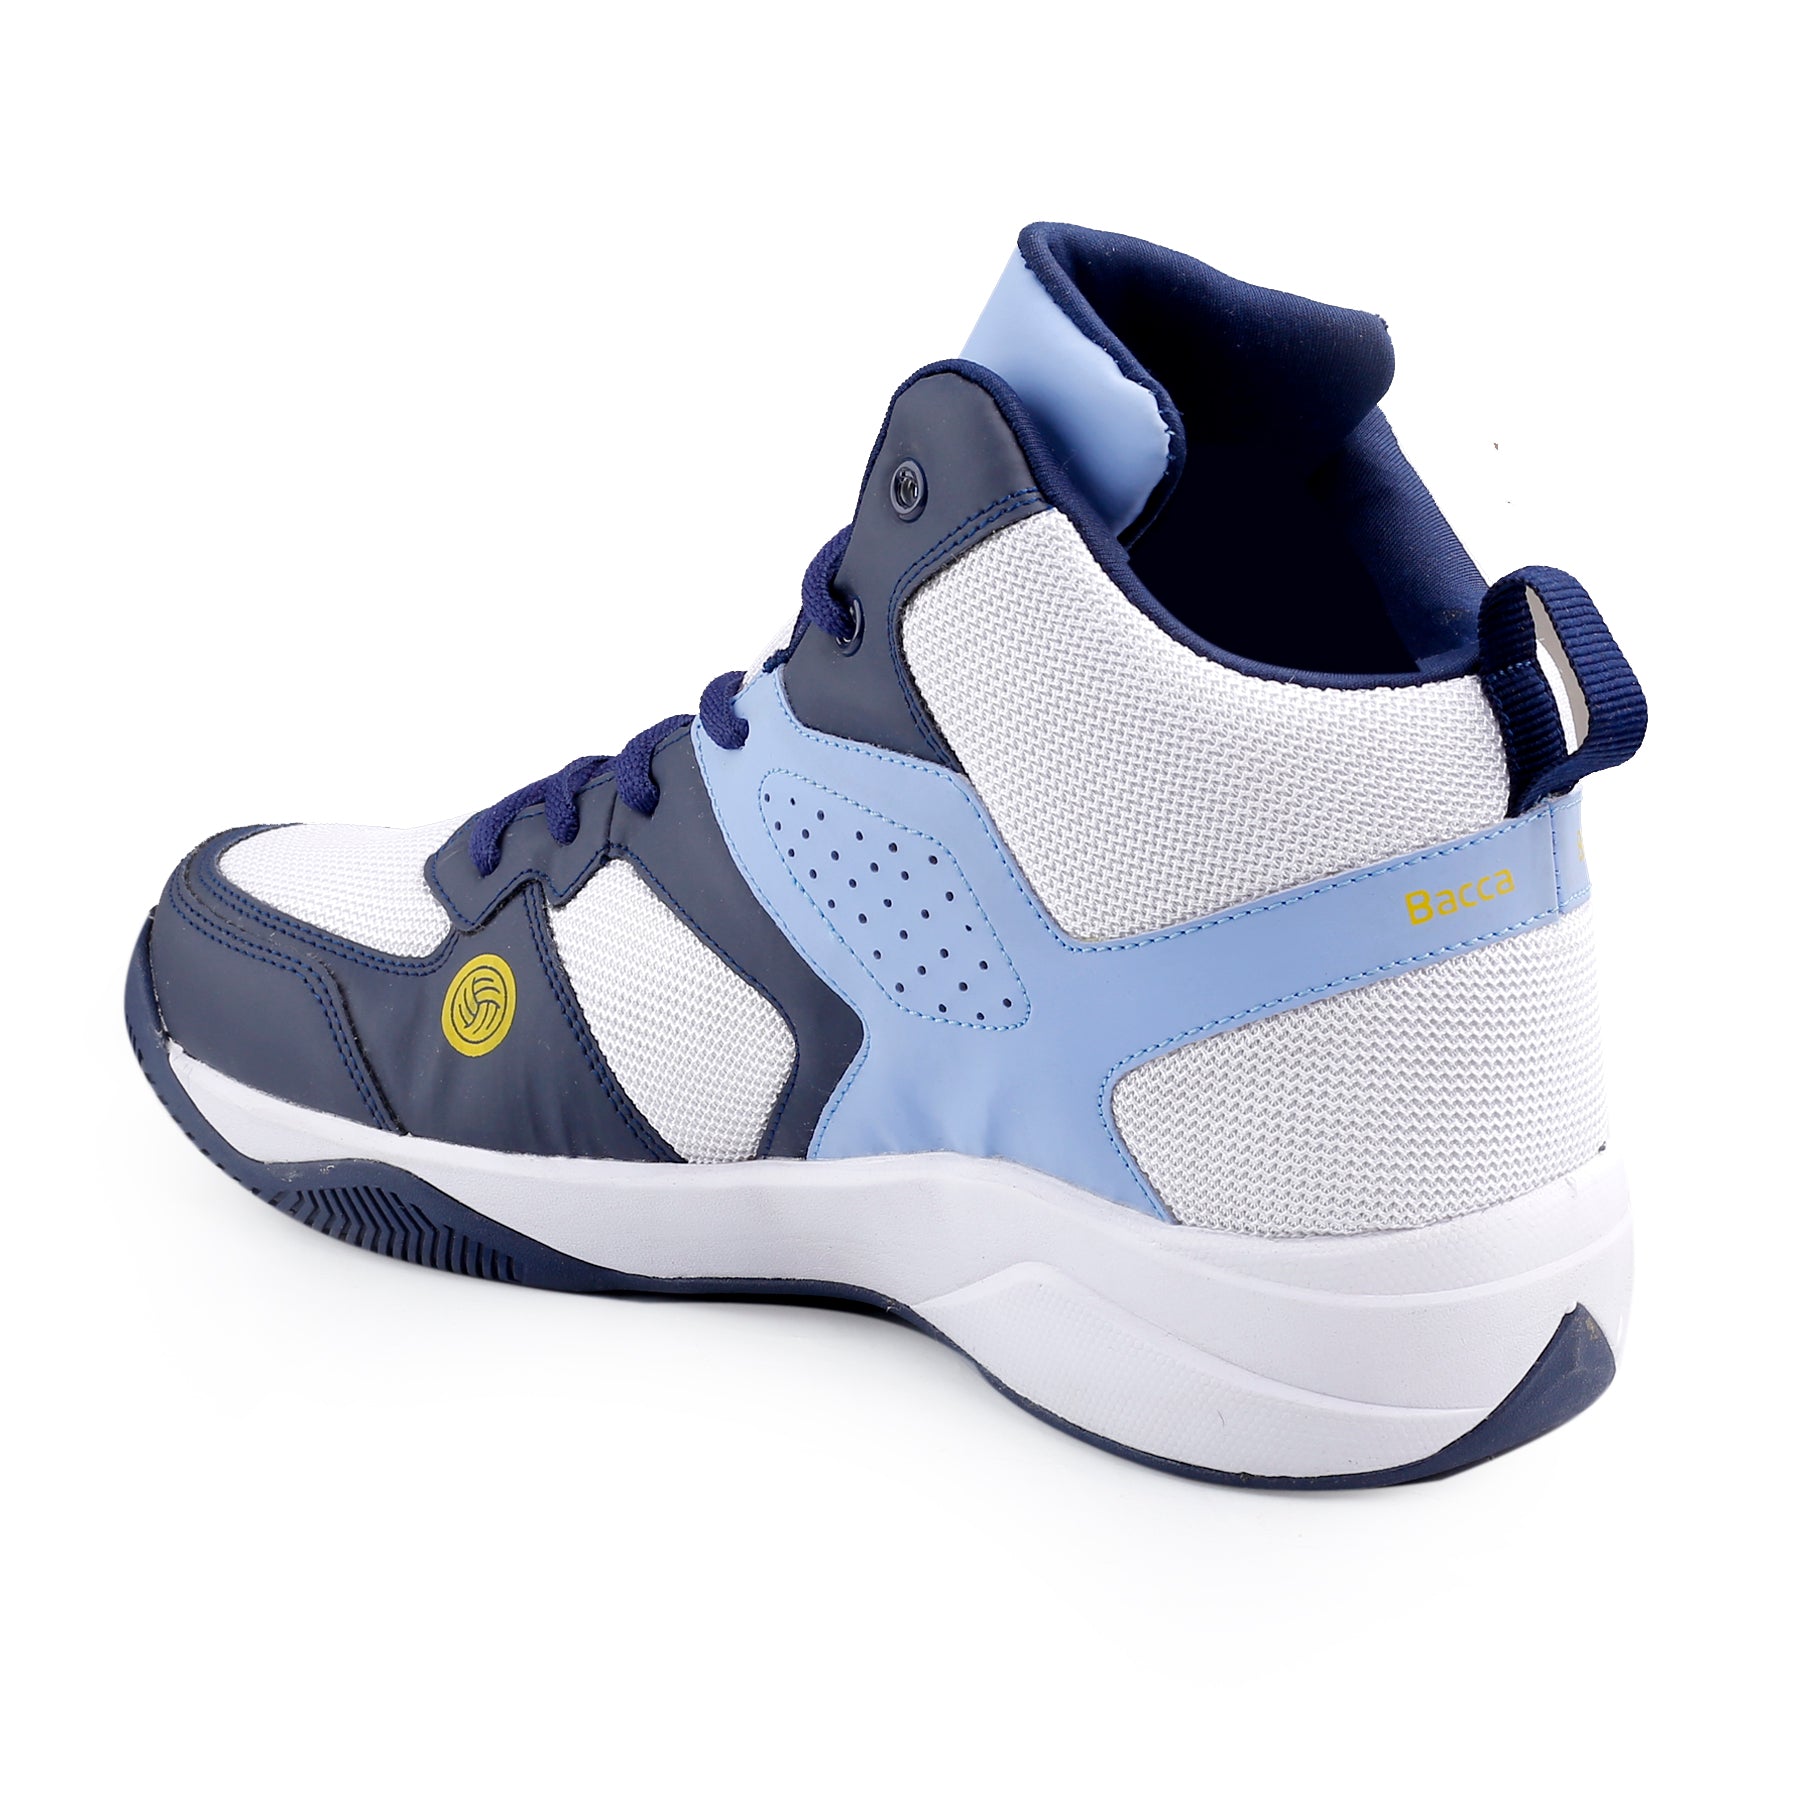 Bacca Bucci Basketball Shoes - WAGER | Zig Zag & Natural Rubber Sole